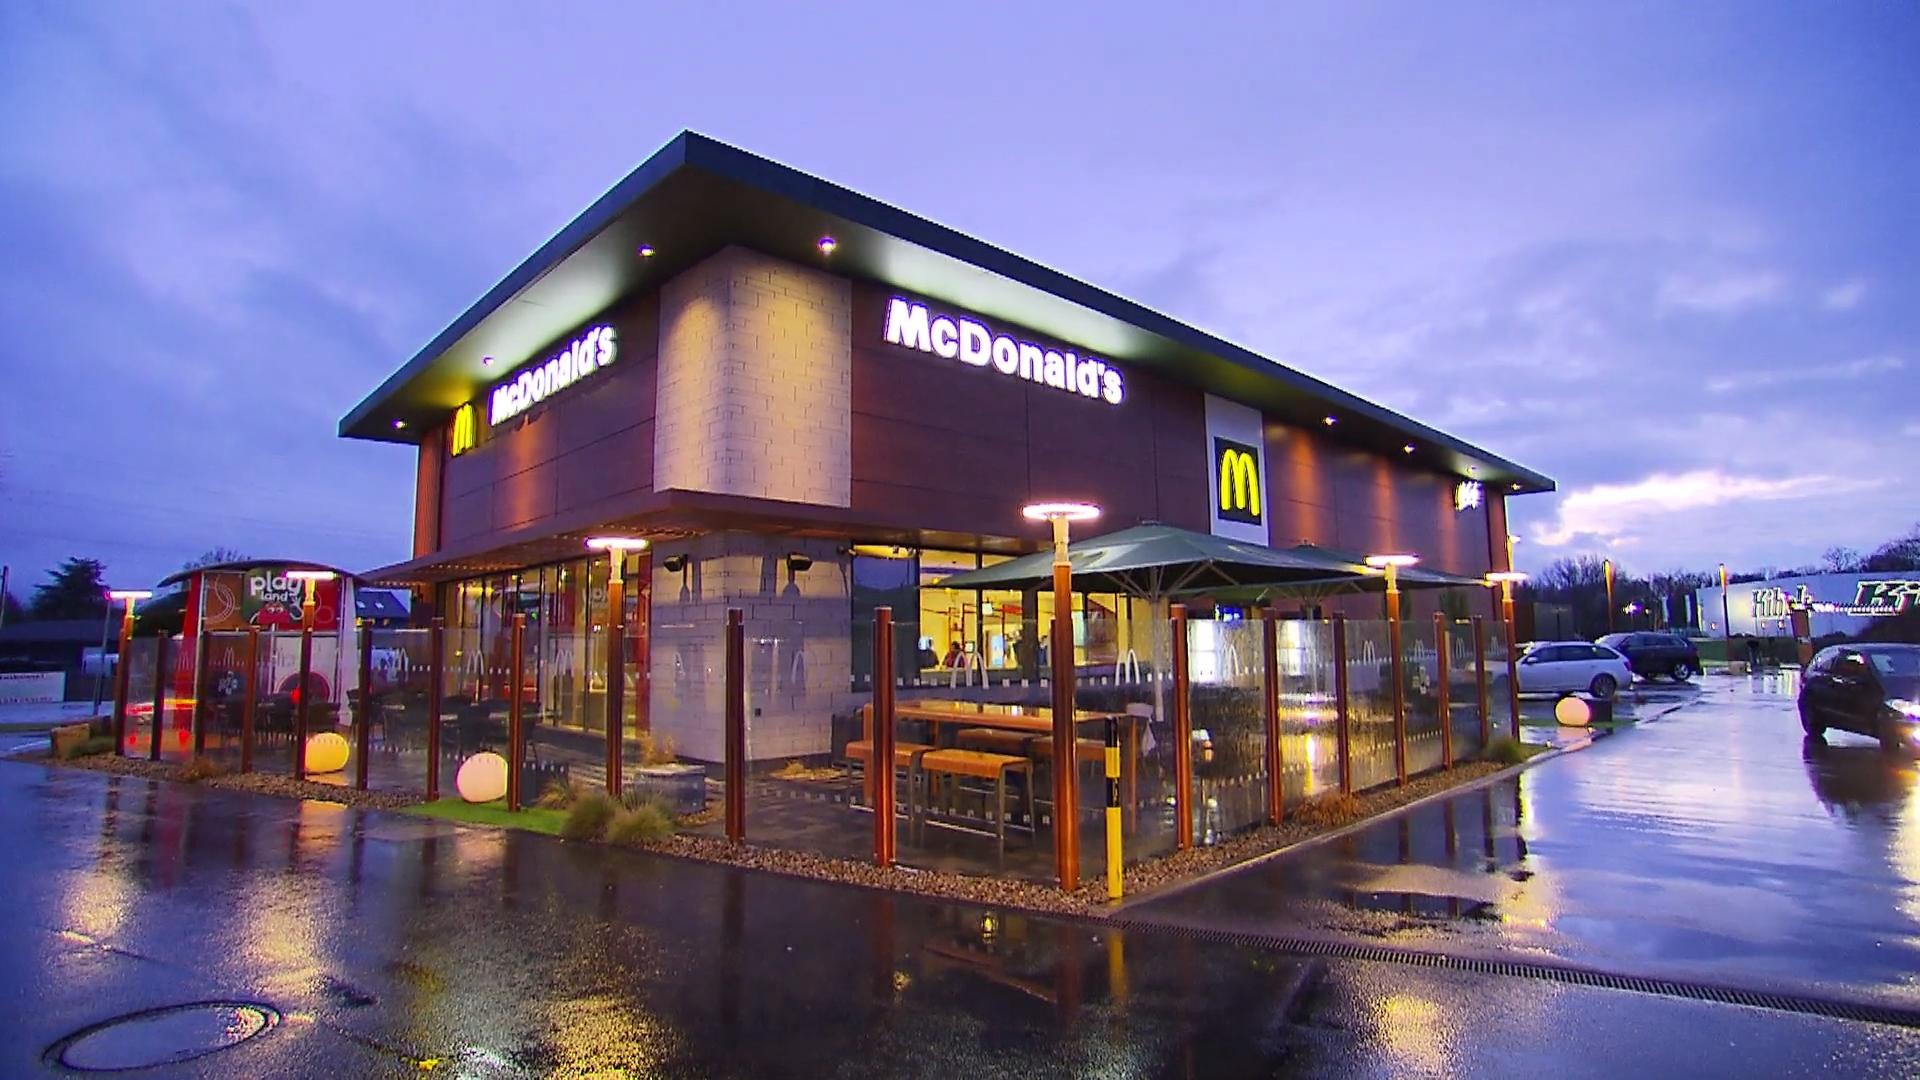 You can now get married at McDonald's!  Fast food romance